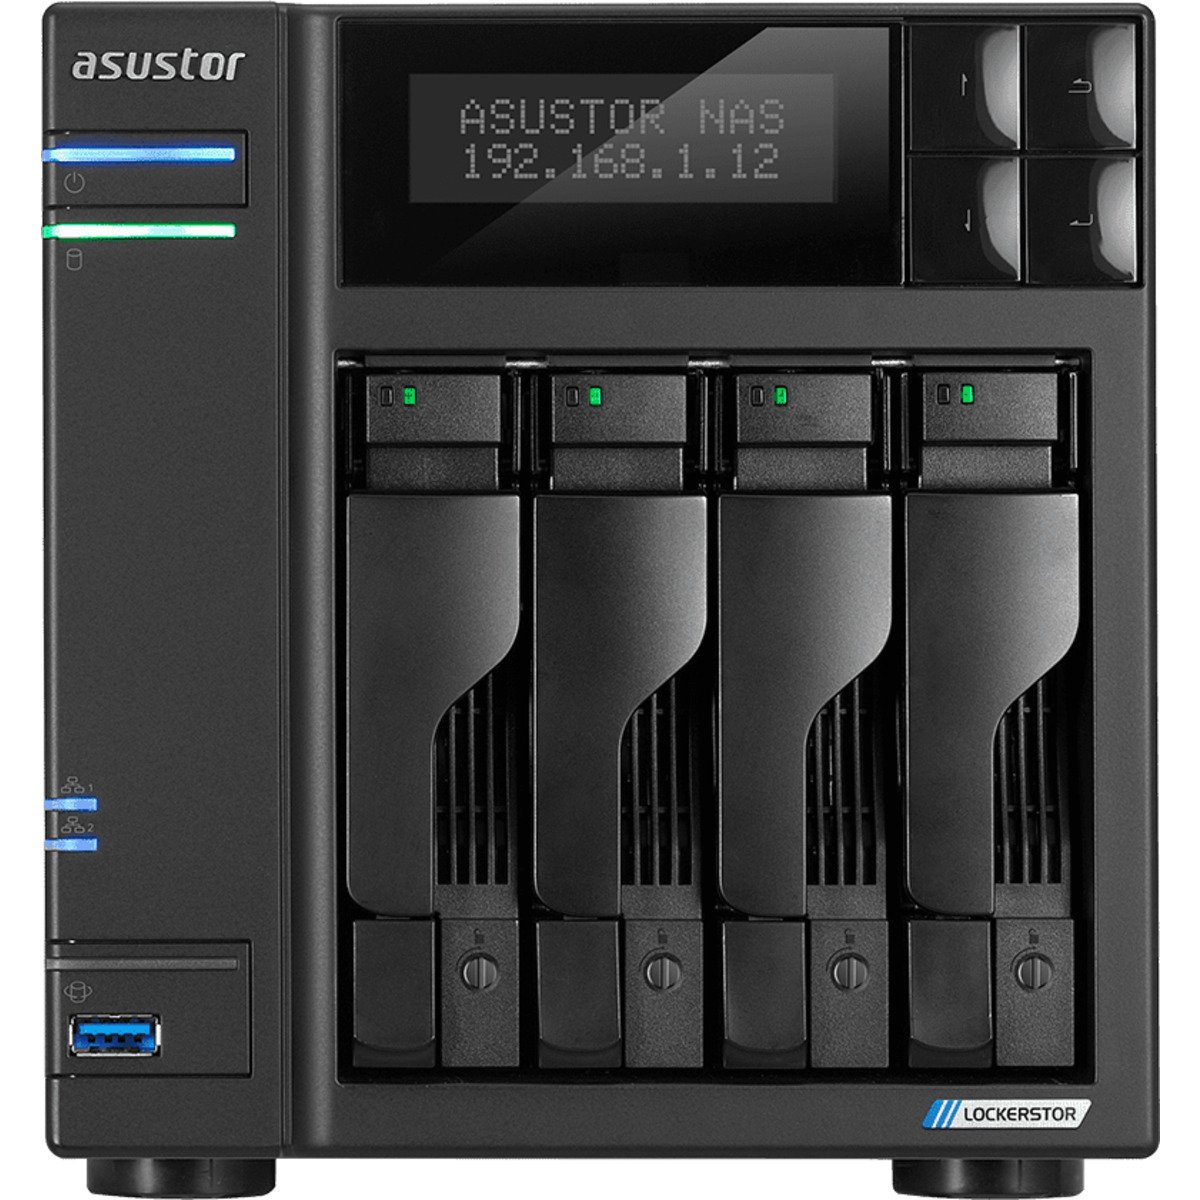 ASUSTOR AS6604T Lockerstor 4 48tb 4-Bay Desktop Multimedia / Power User / Business NAS - Network Attached Storage Device 4x12tb Toshiba Enterprise Capacity MG07ACA12TE 3.5 7200rpm SATA 6Gb/s HDD ENTERPRISE Class Drives Installed - Burn-In Tested - FREE RAM UPGRADE AS6604T Lockerstor 4